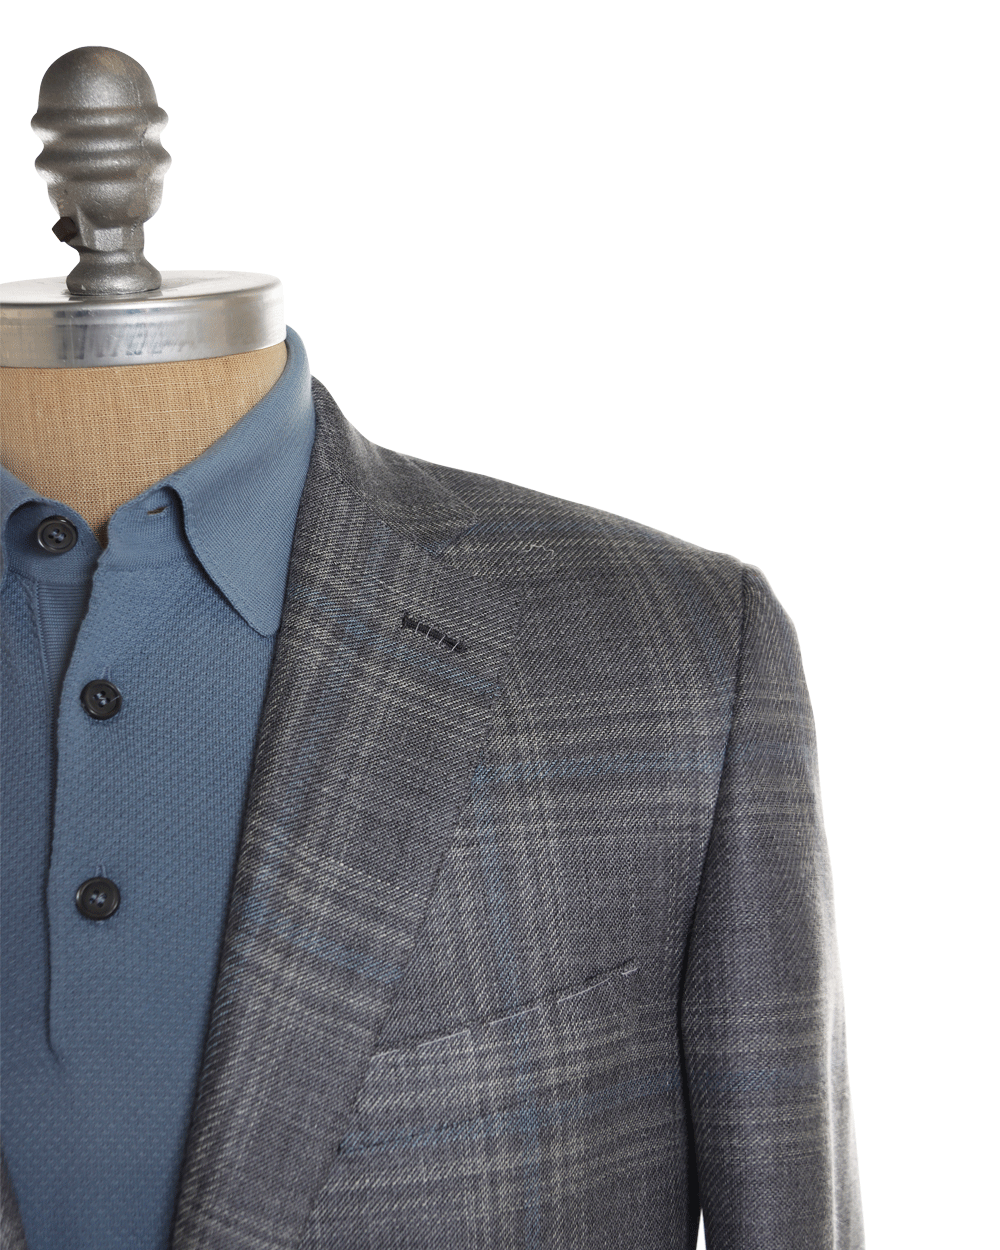 Lead and Soft Blue Faded Light Checked Sportcoat